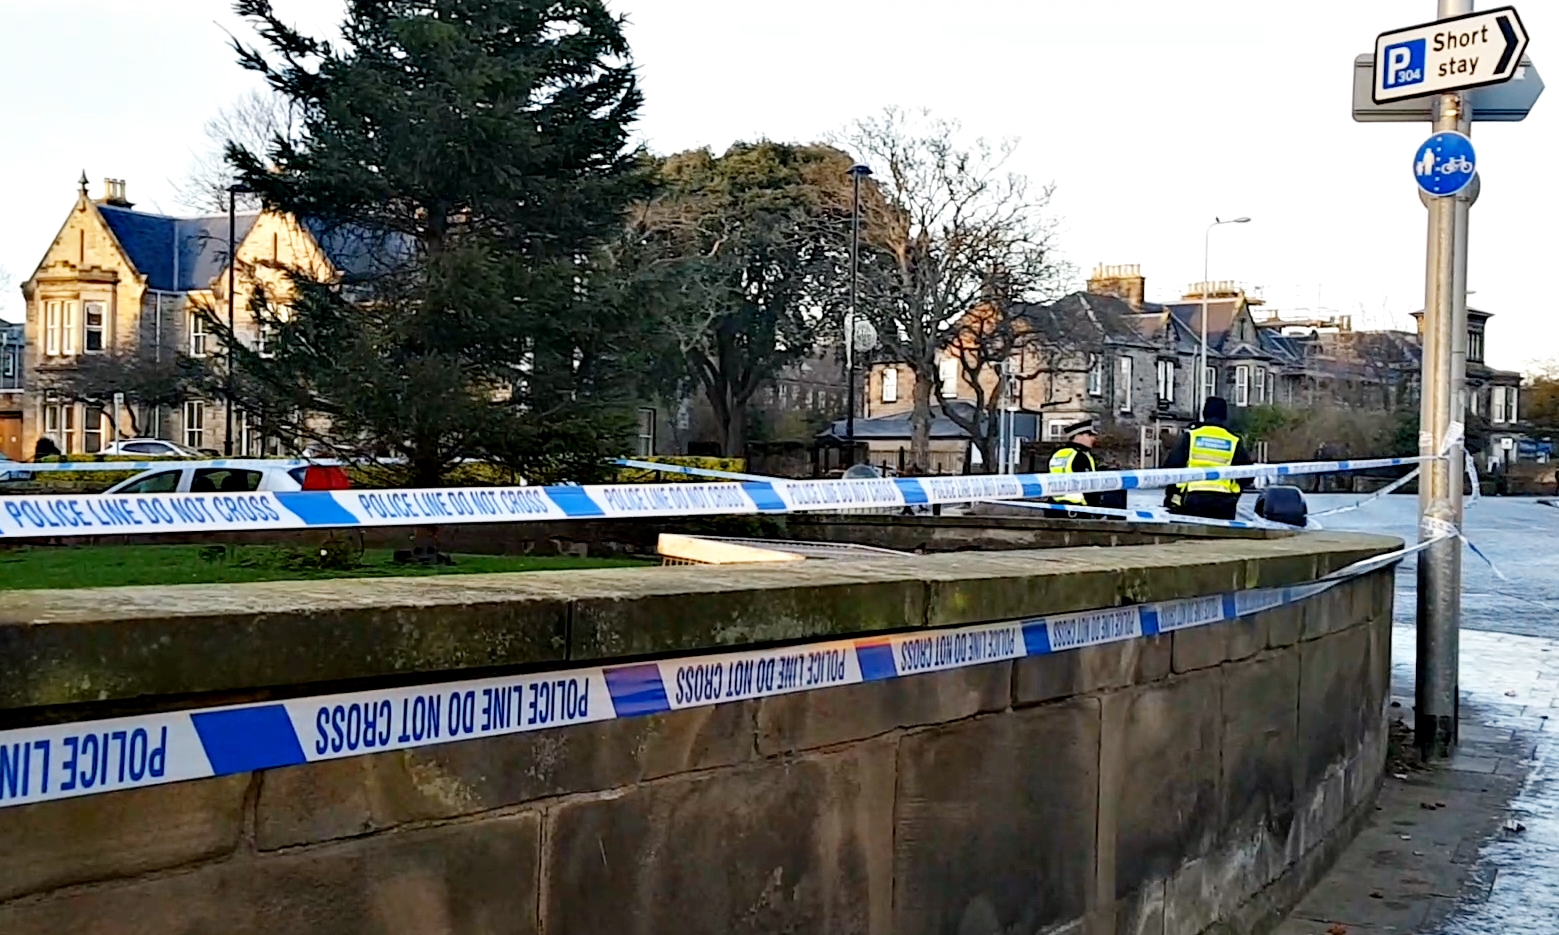 Police tape at the scene of the tragedy.